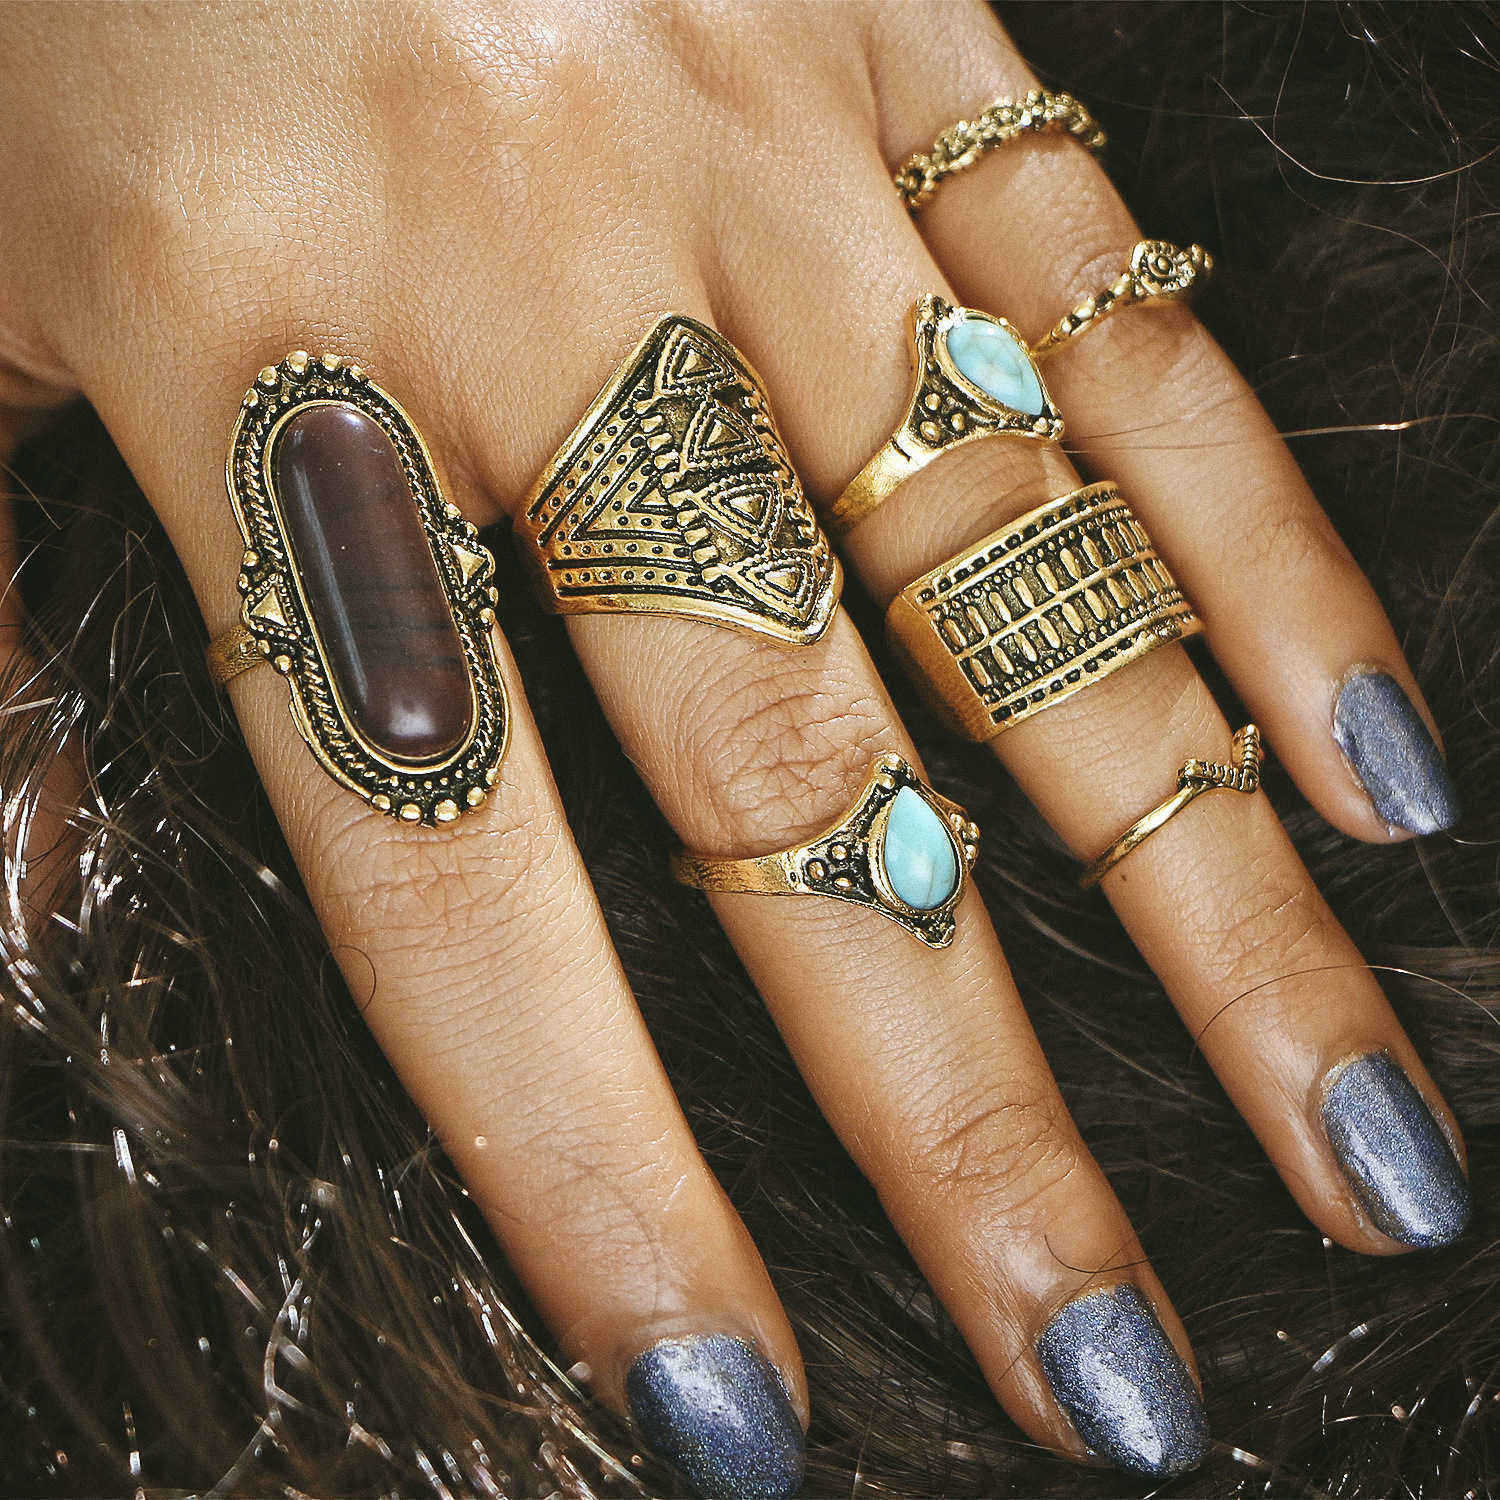 8-Pcs-Bohemian-Silver-Color-Ring-Set-Turquoise-Gem-Knuckle-Rings-Gift-for-Women-1246965